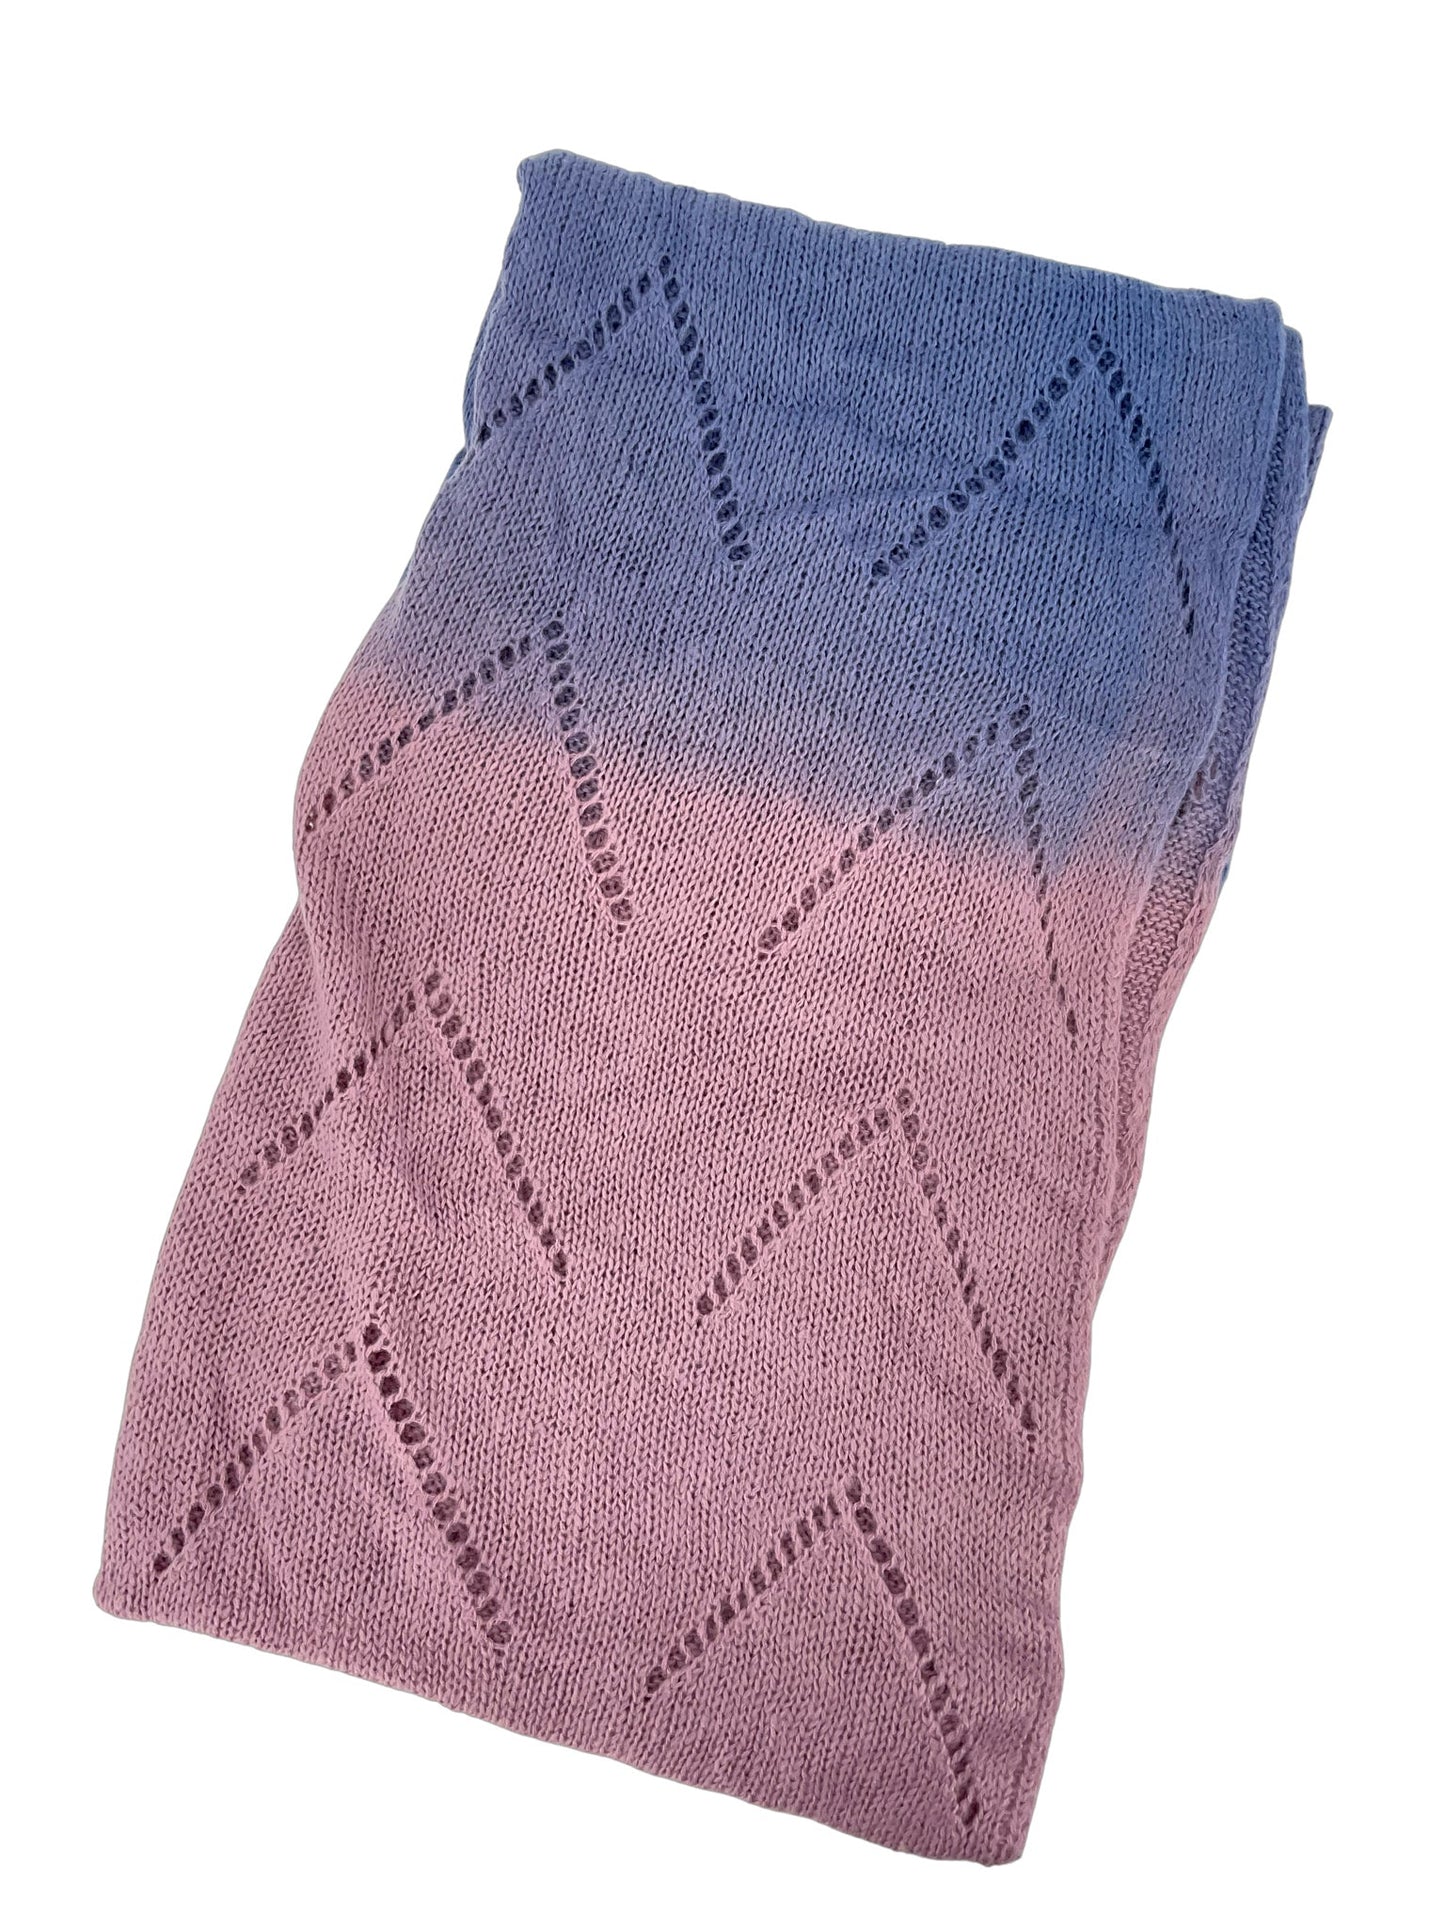 MICHAEL STARS BLUE OMBRE KNIT INFINITY SCARF